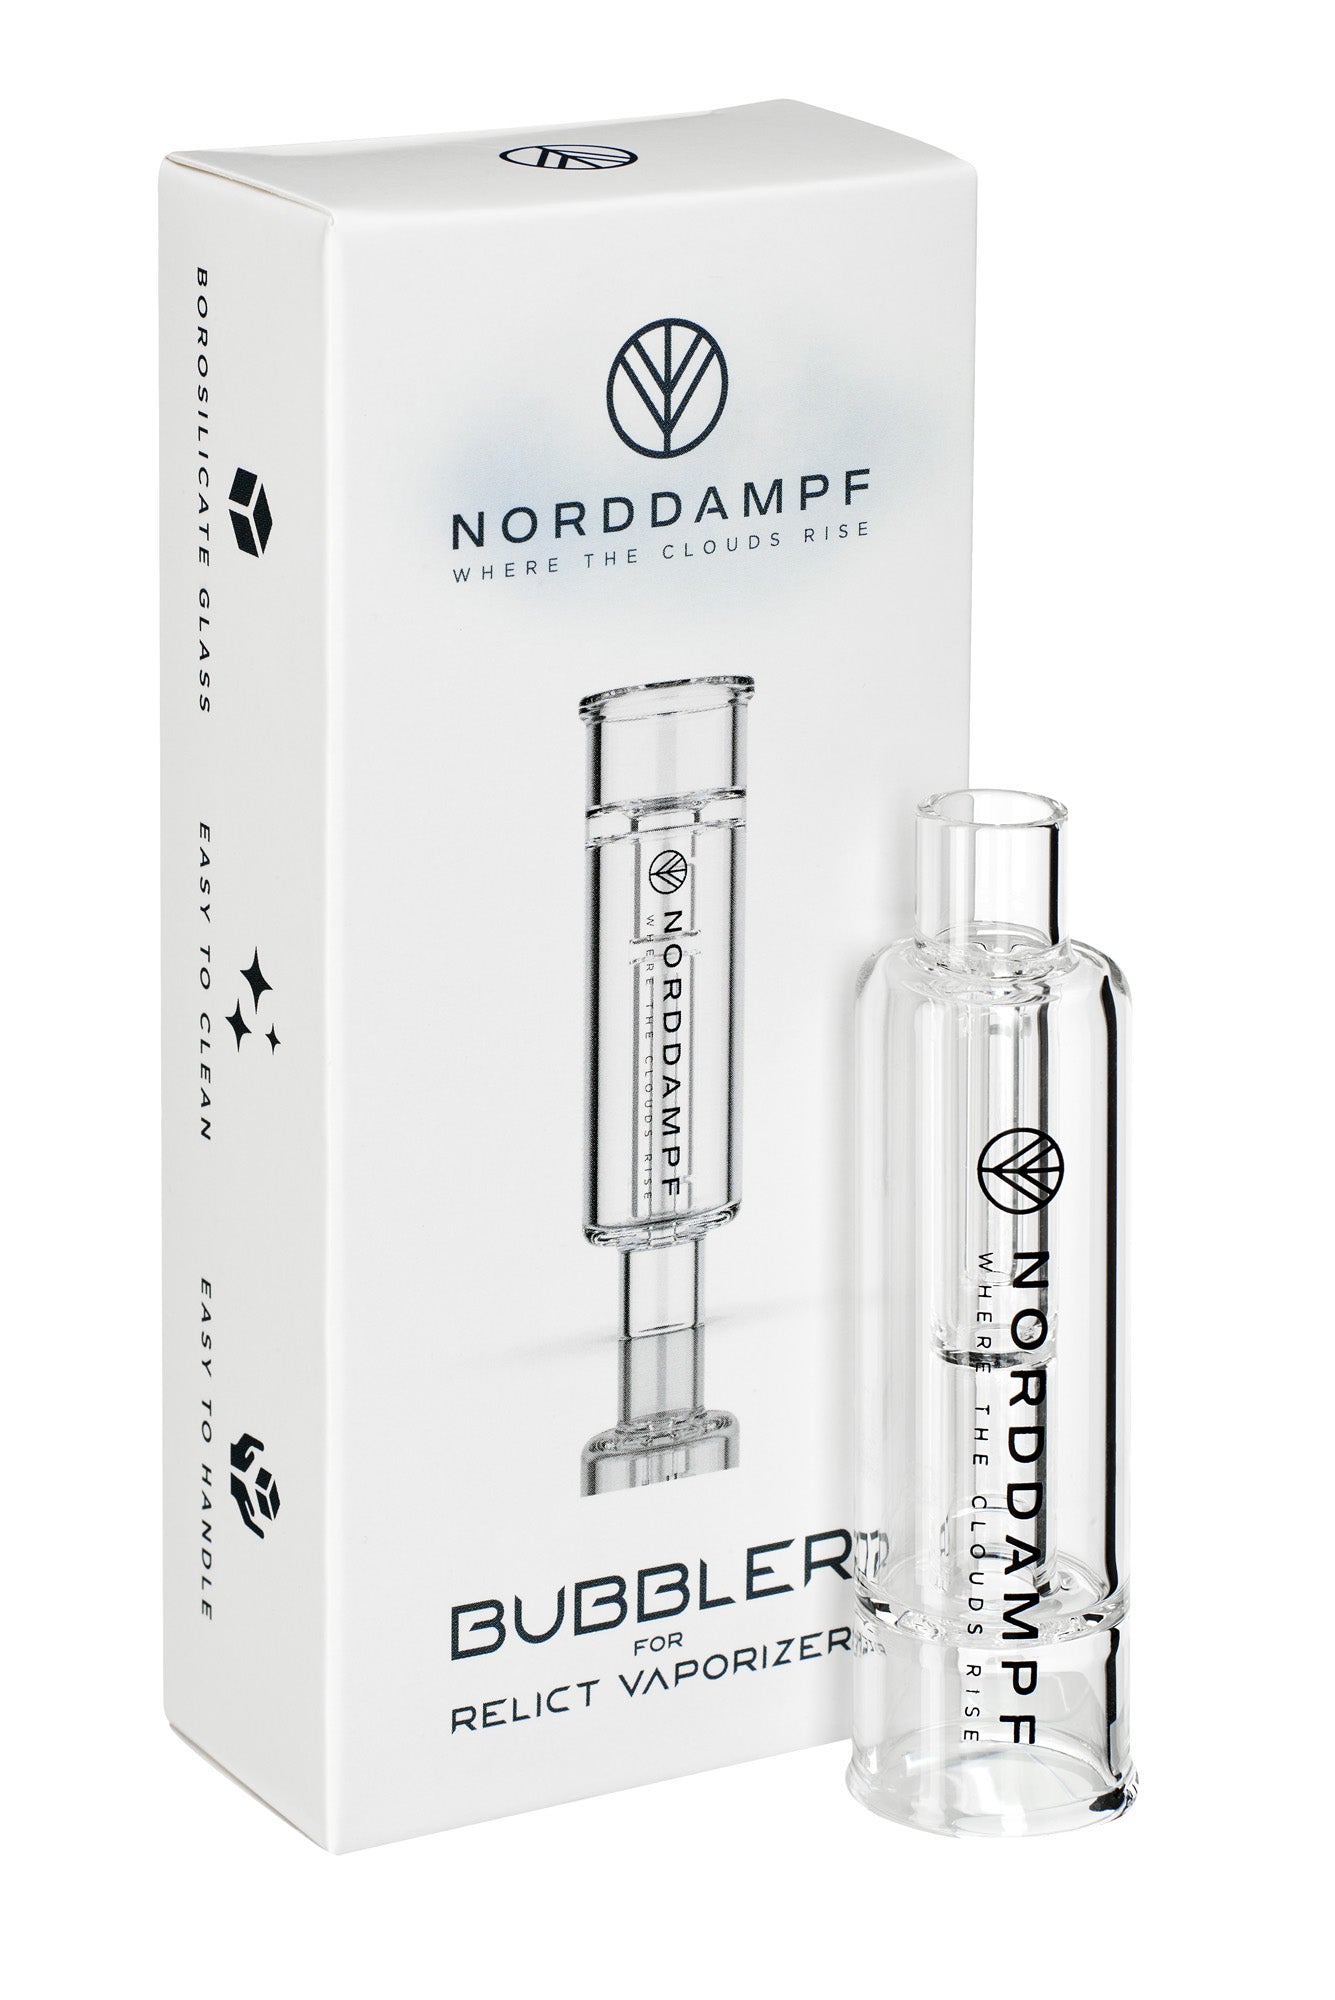 Norddampf - Relict, Bubbler